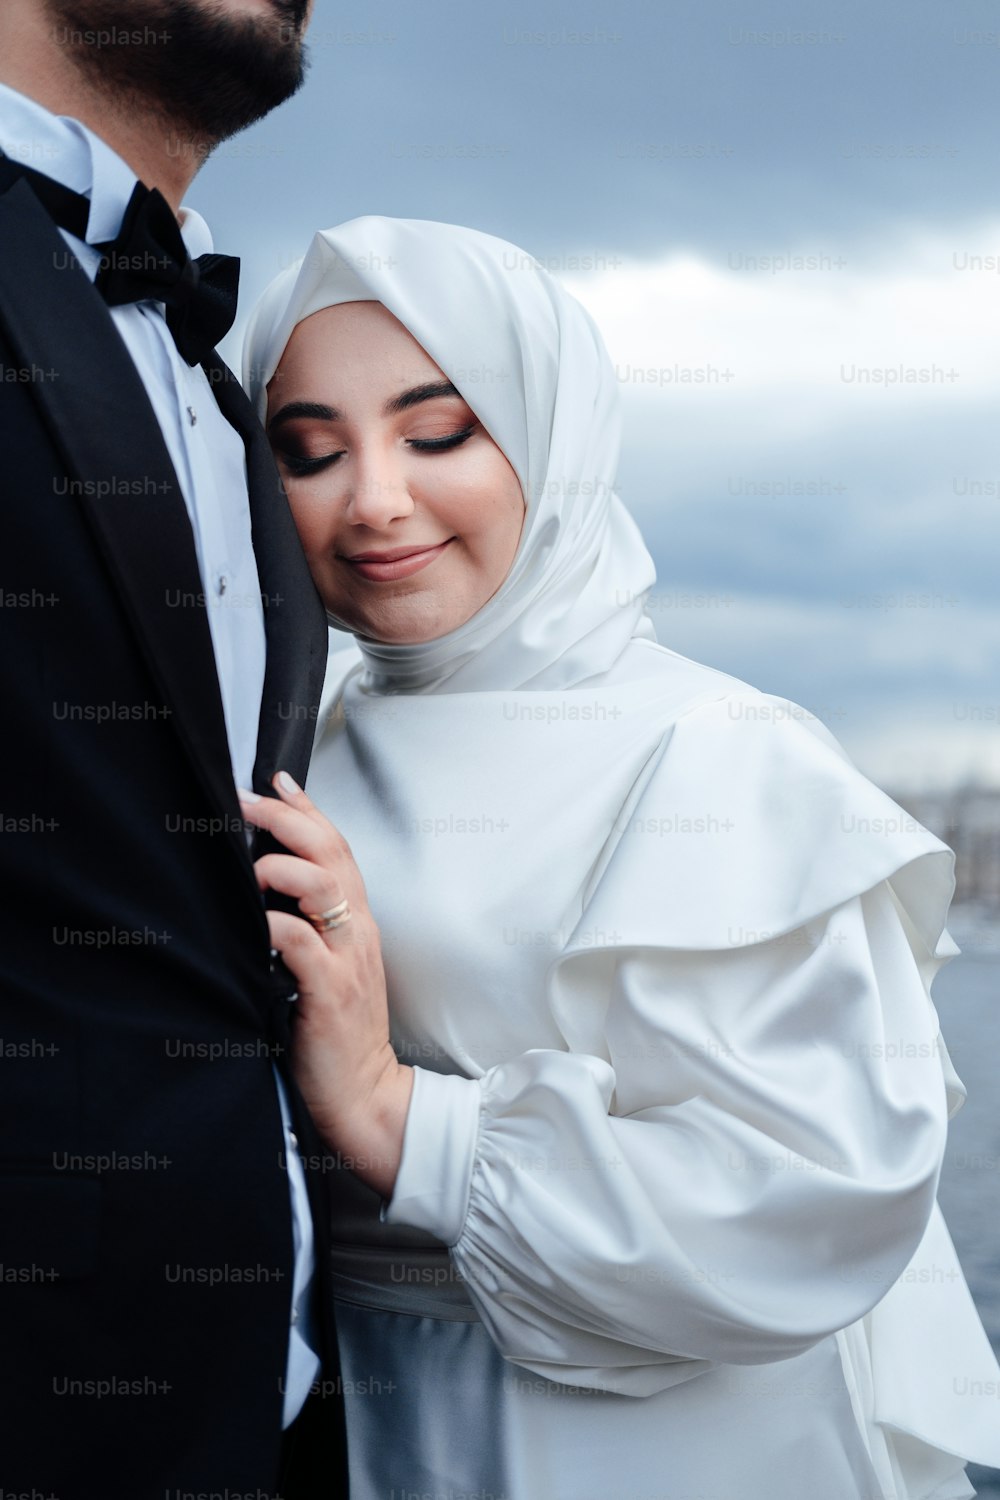 a man and woman in wedding attire